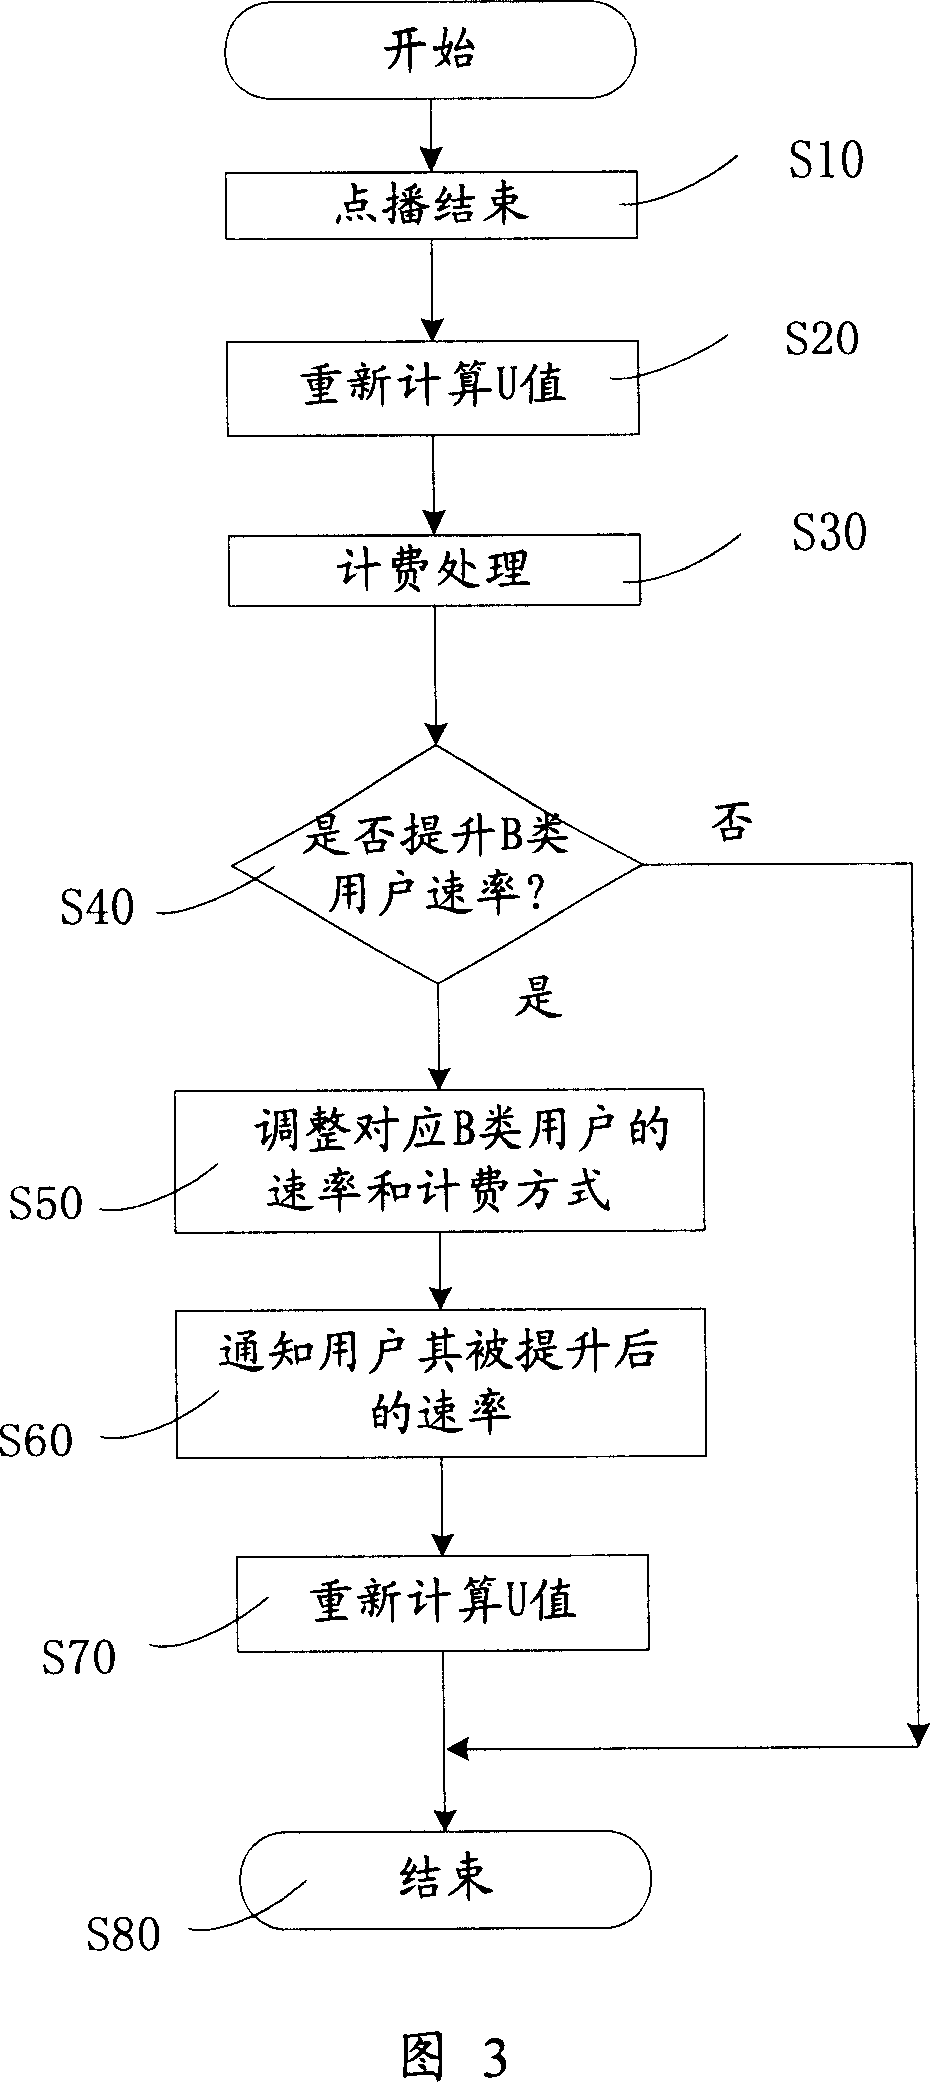 Control method, device and use for video frequency ordering